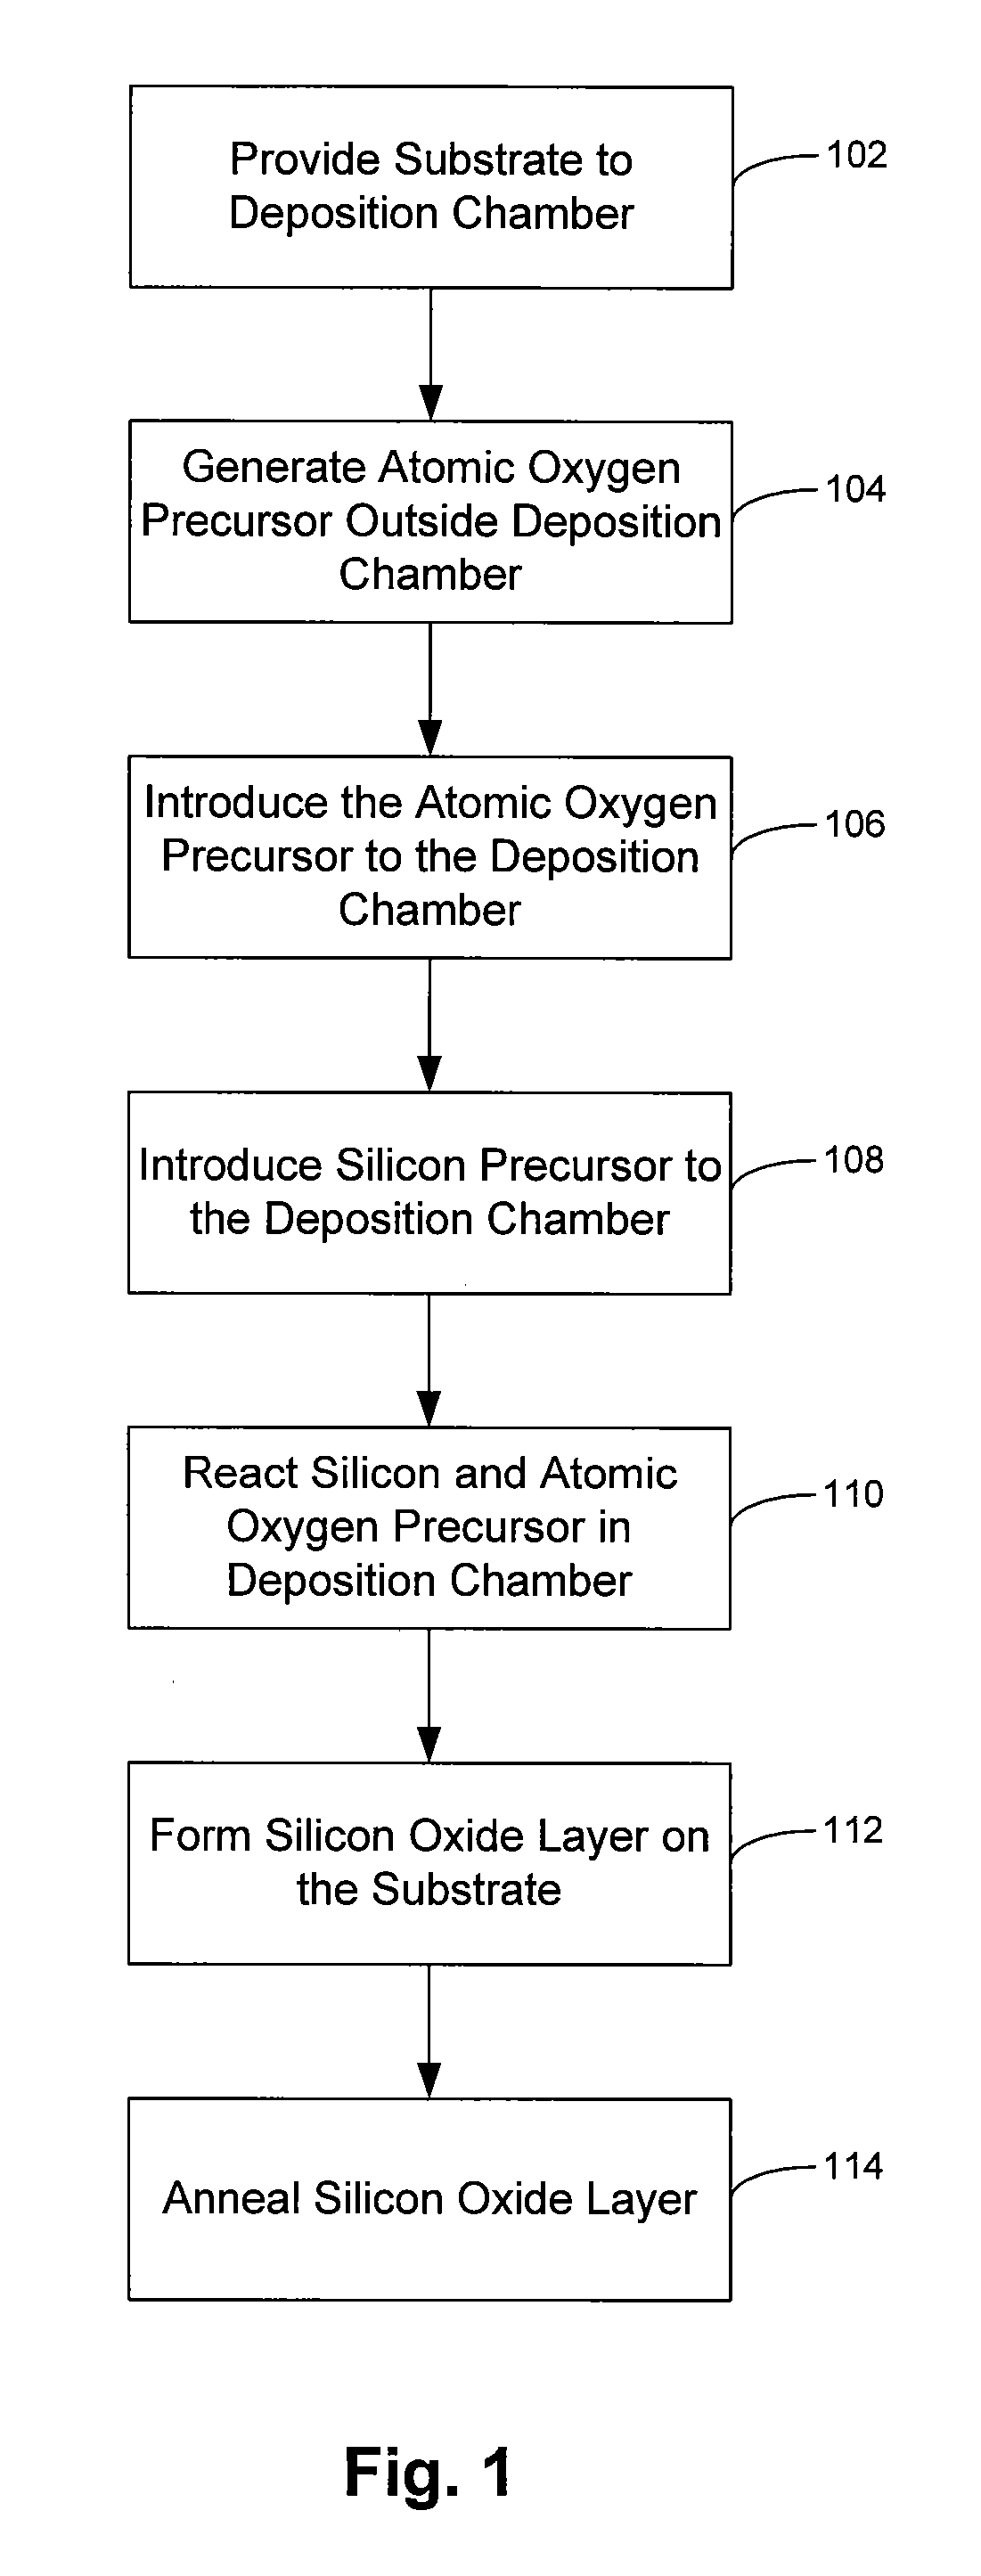 Chemical vapor deposition of high quality flow-like silicon dioxide using a silicon containing precursor and atomic oxygen